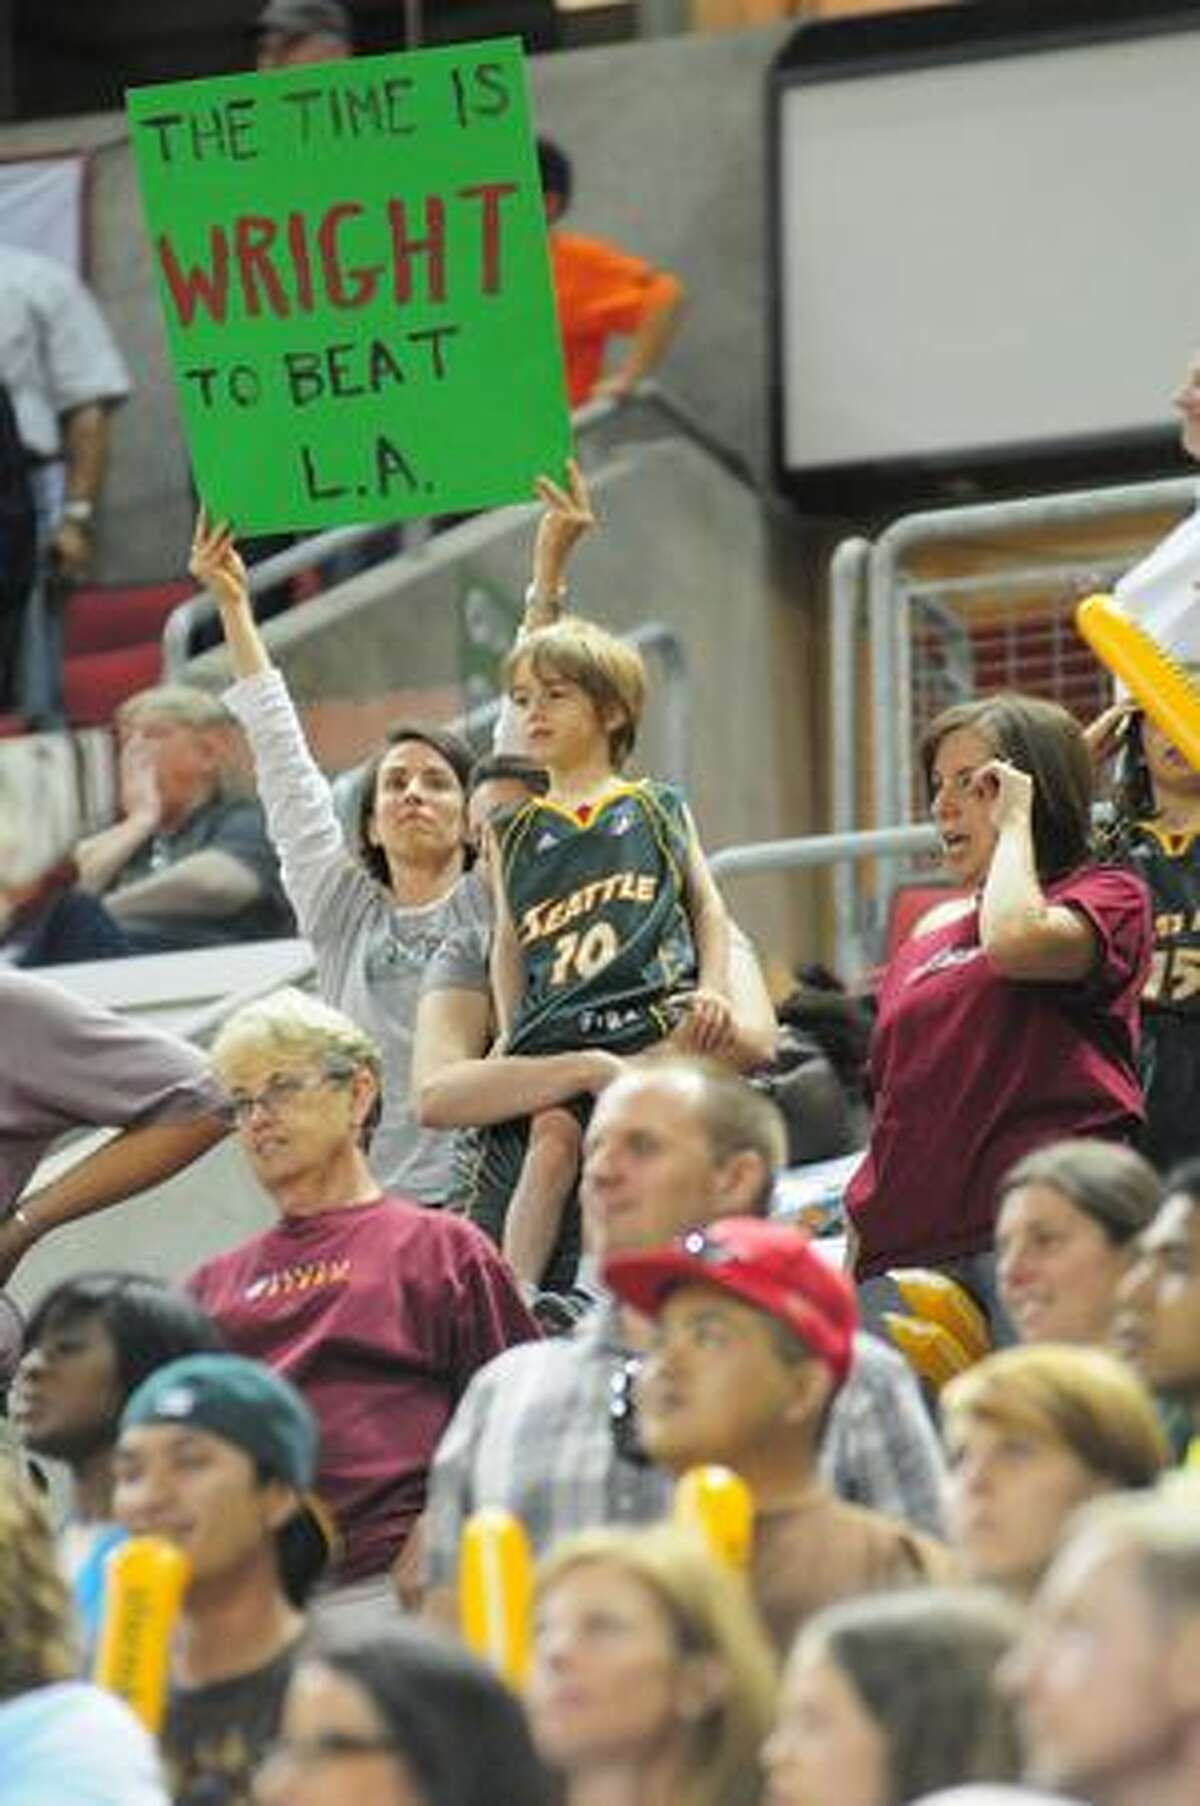 A Seattle Storm fan holds up a sign during the 3rd quarter of play. Photo by Daniel Berman/SeattlePI.com